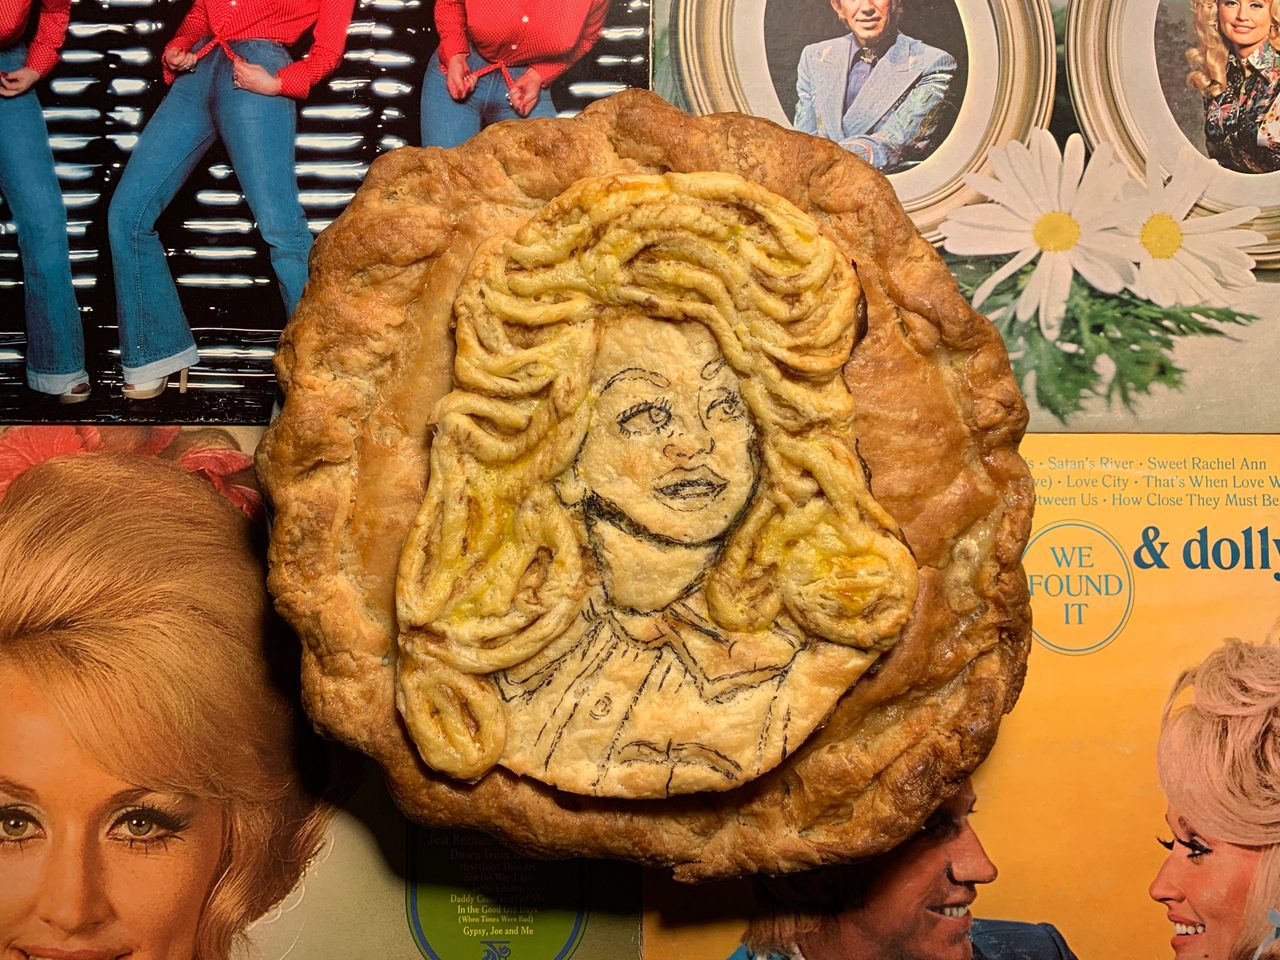 For Tennessee's biscuits and gravy pie, only Dolly would do as decor.